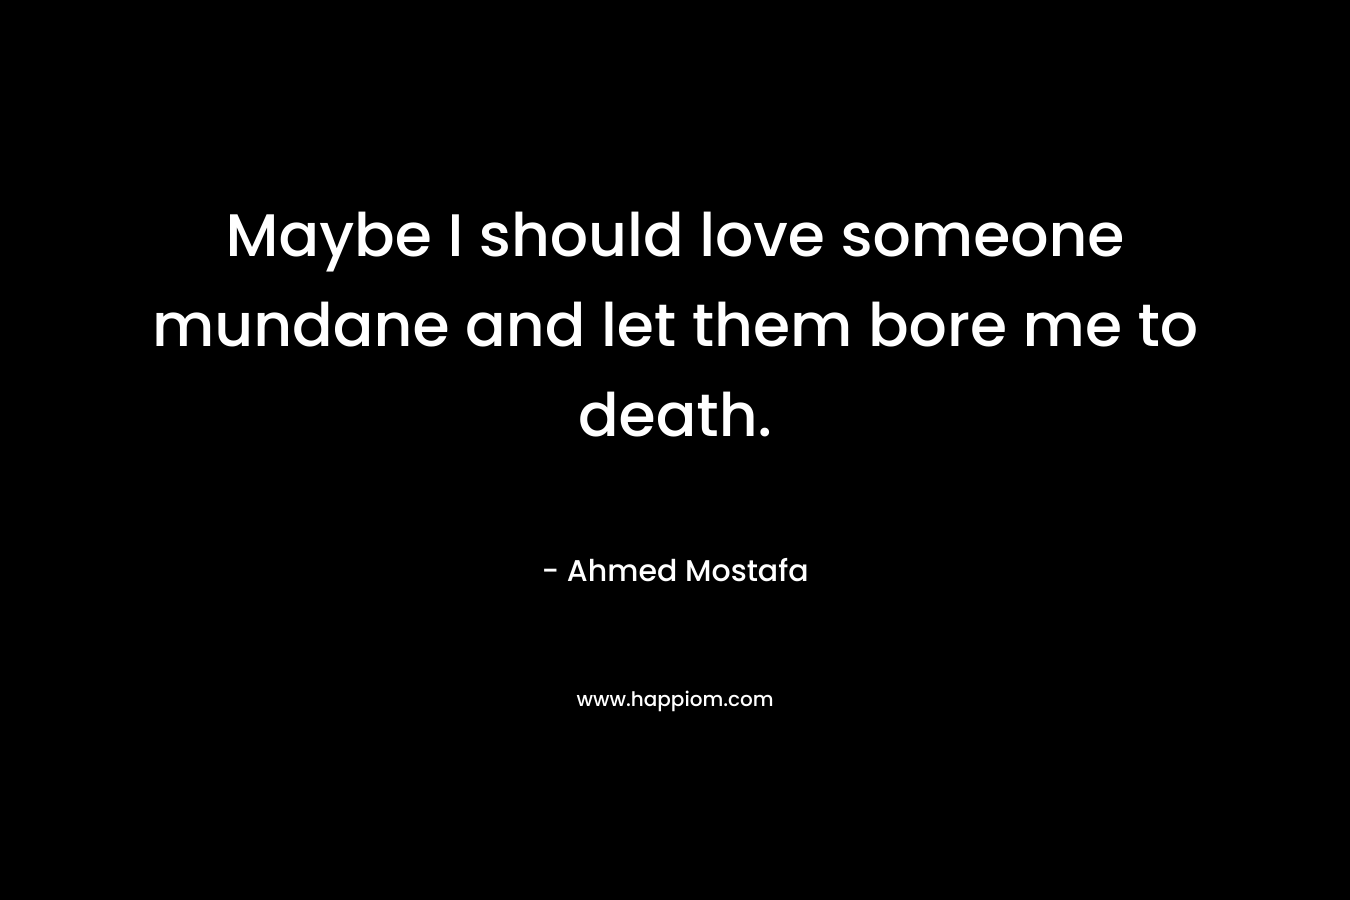 Maybe I should love someone mundane and let them bore me to death.